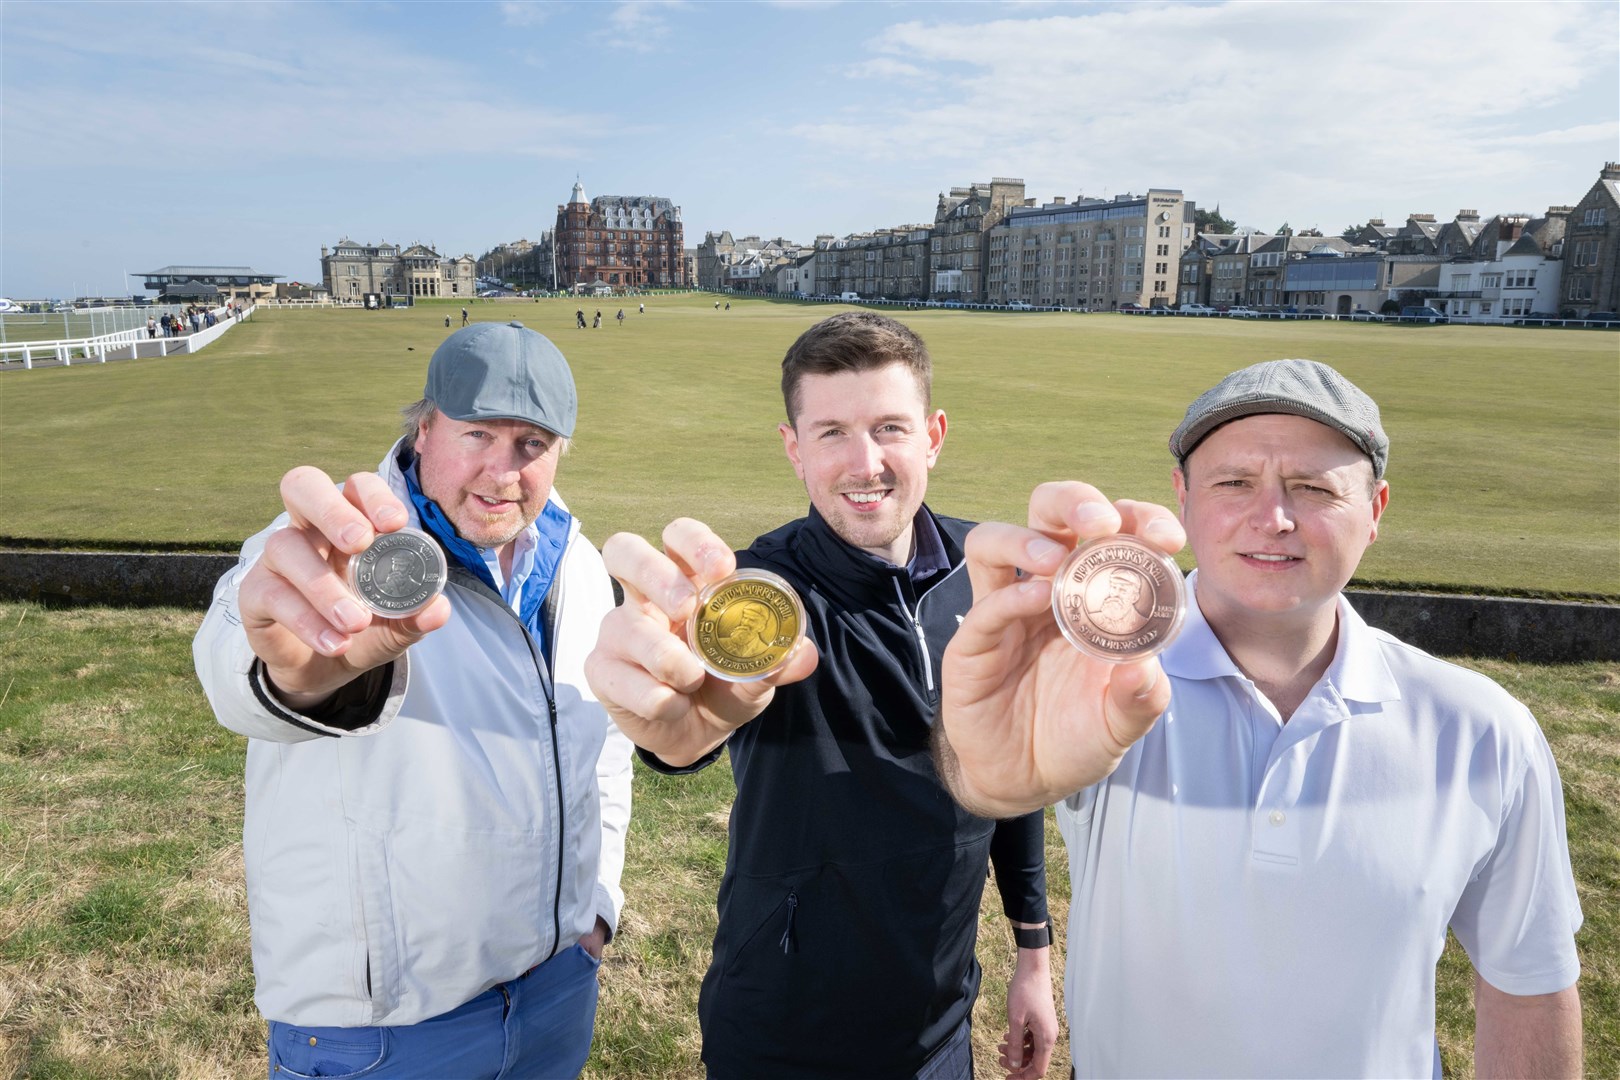 Dave Harris (left), with Bonnie Wee Golf tour specialist team Cam Howe (centre) and director Stew Morrison, display the Old Tom Morris Trail commemorative coins. (Picture Michal Wachucik, Abermedia)